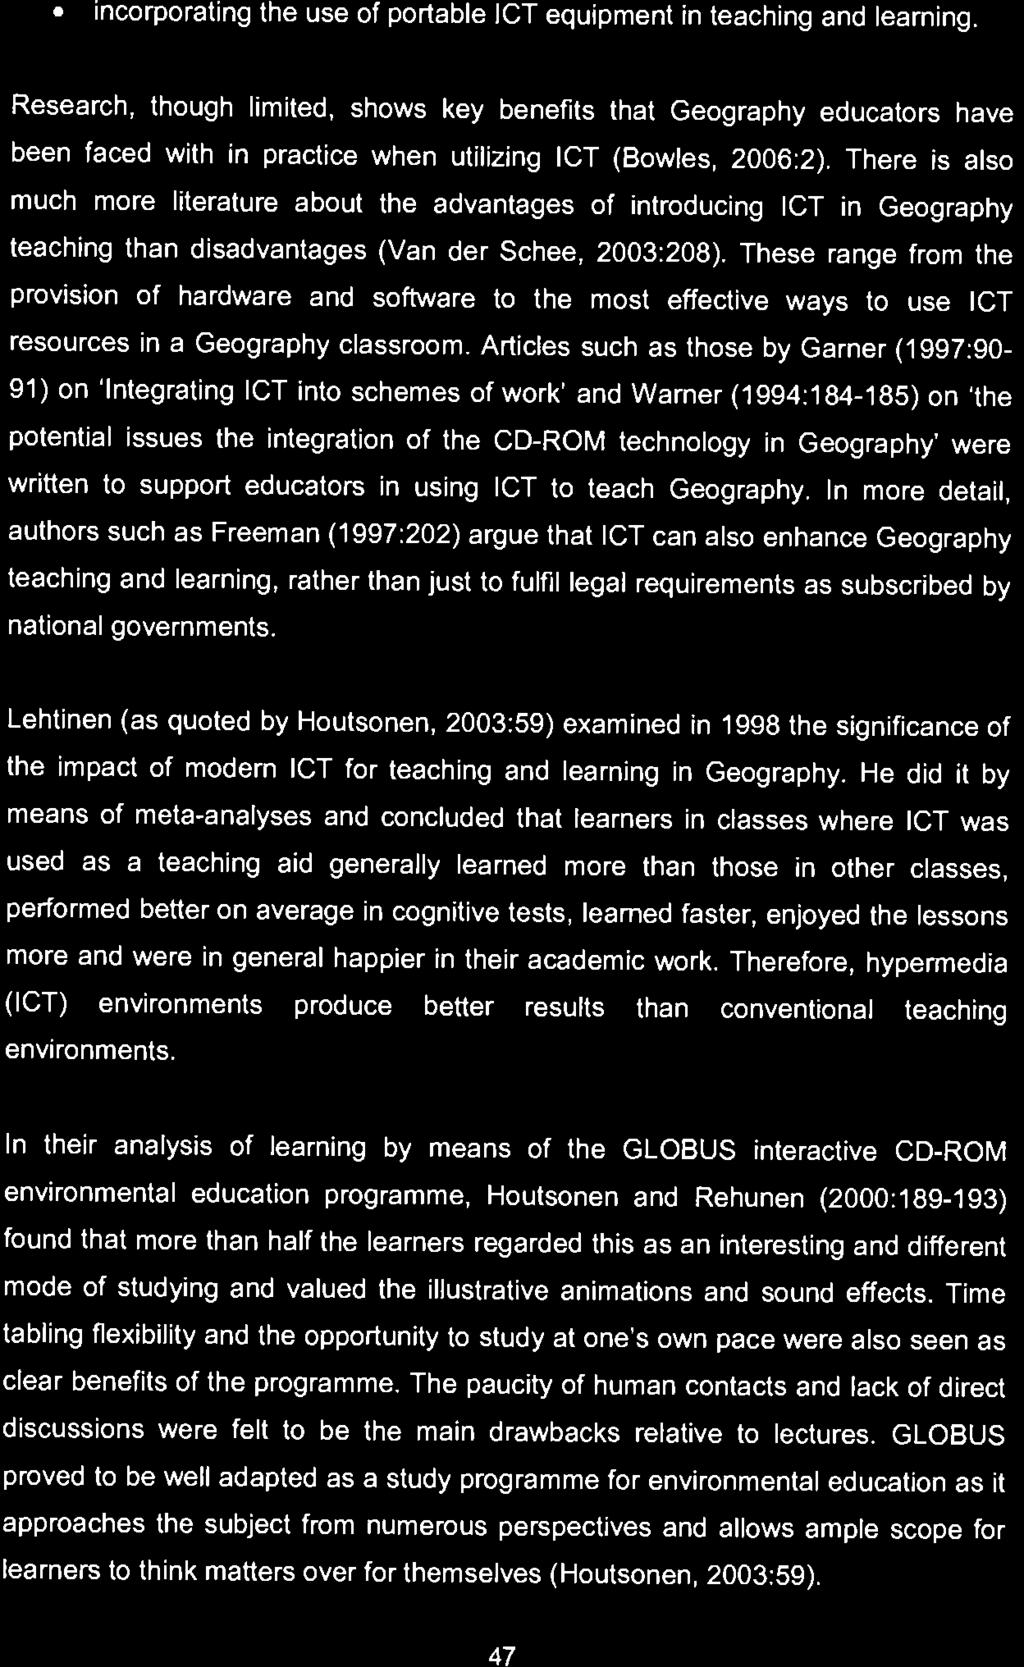 Articles such as those By Garner (1997:90-91) on 'Integrating ICT into schemes of work' and Warner (1994:184-185) on 'the potential issues the integration of the CD-ROM technology in Geography' were